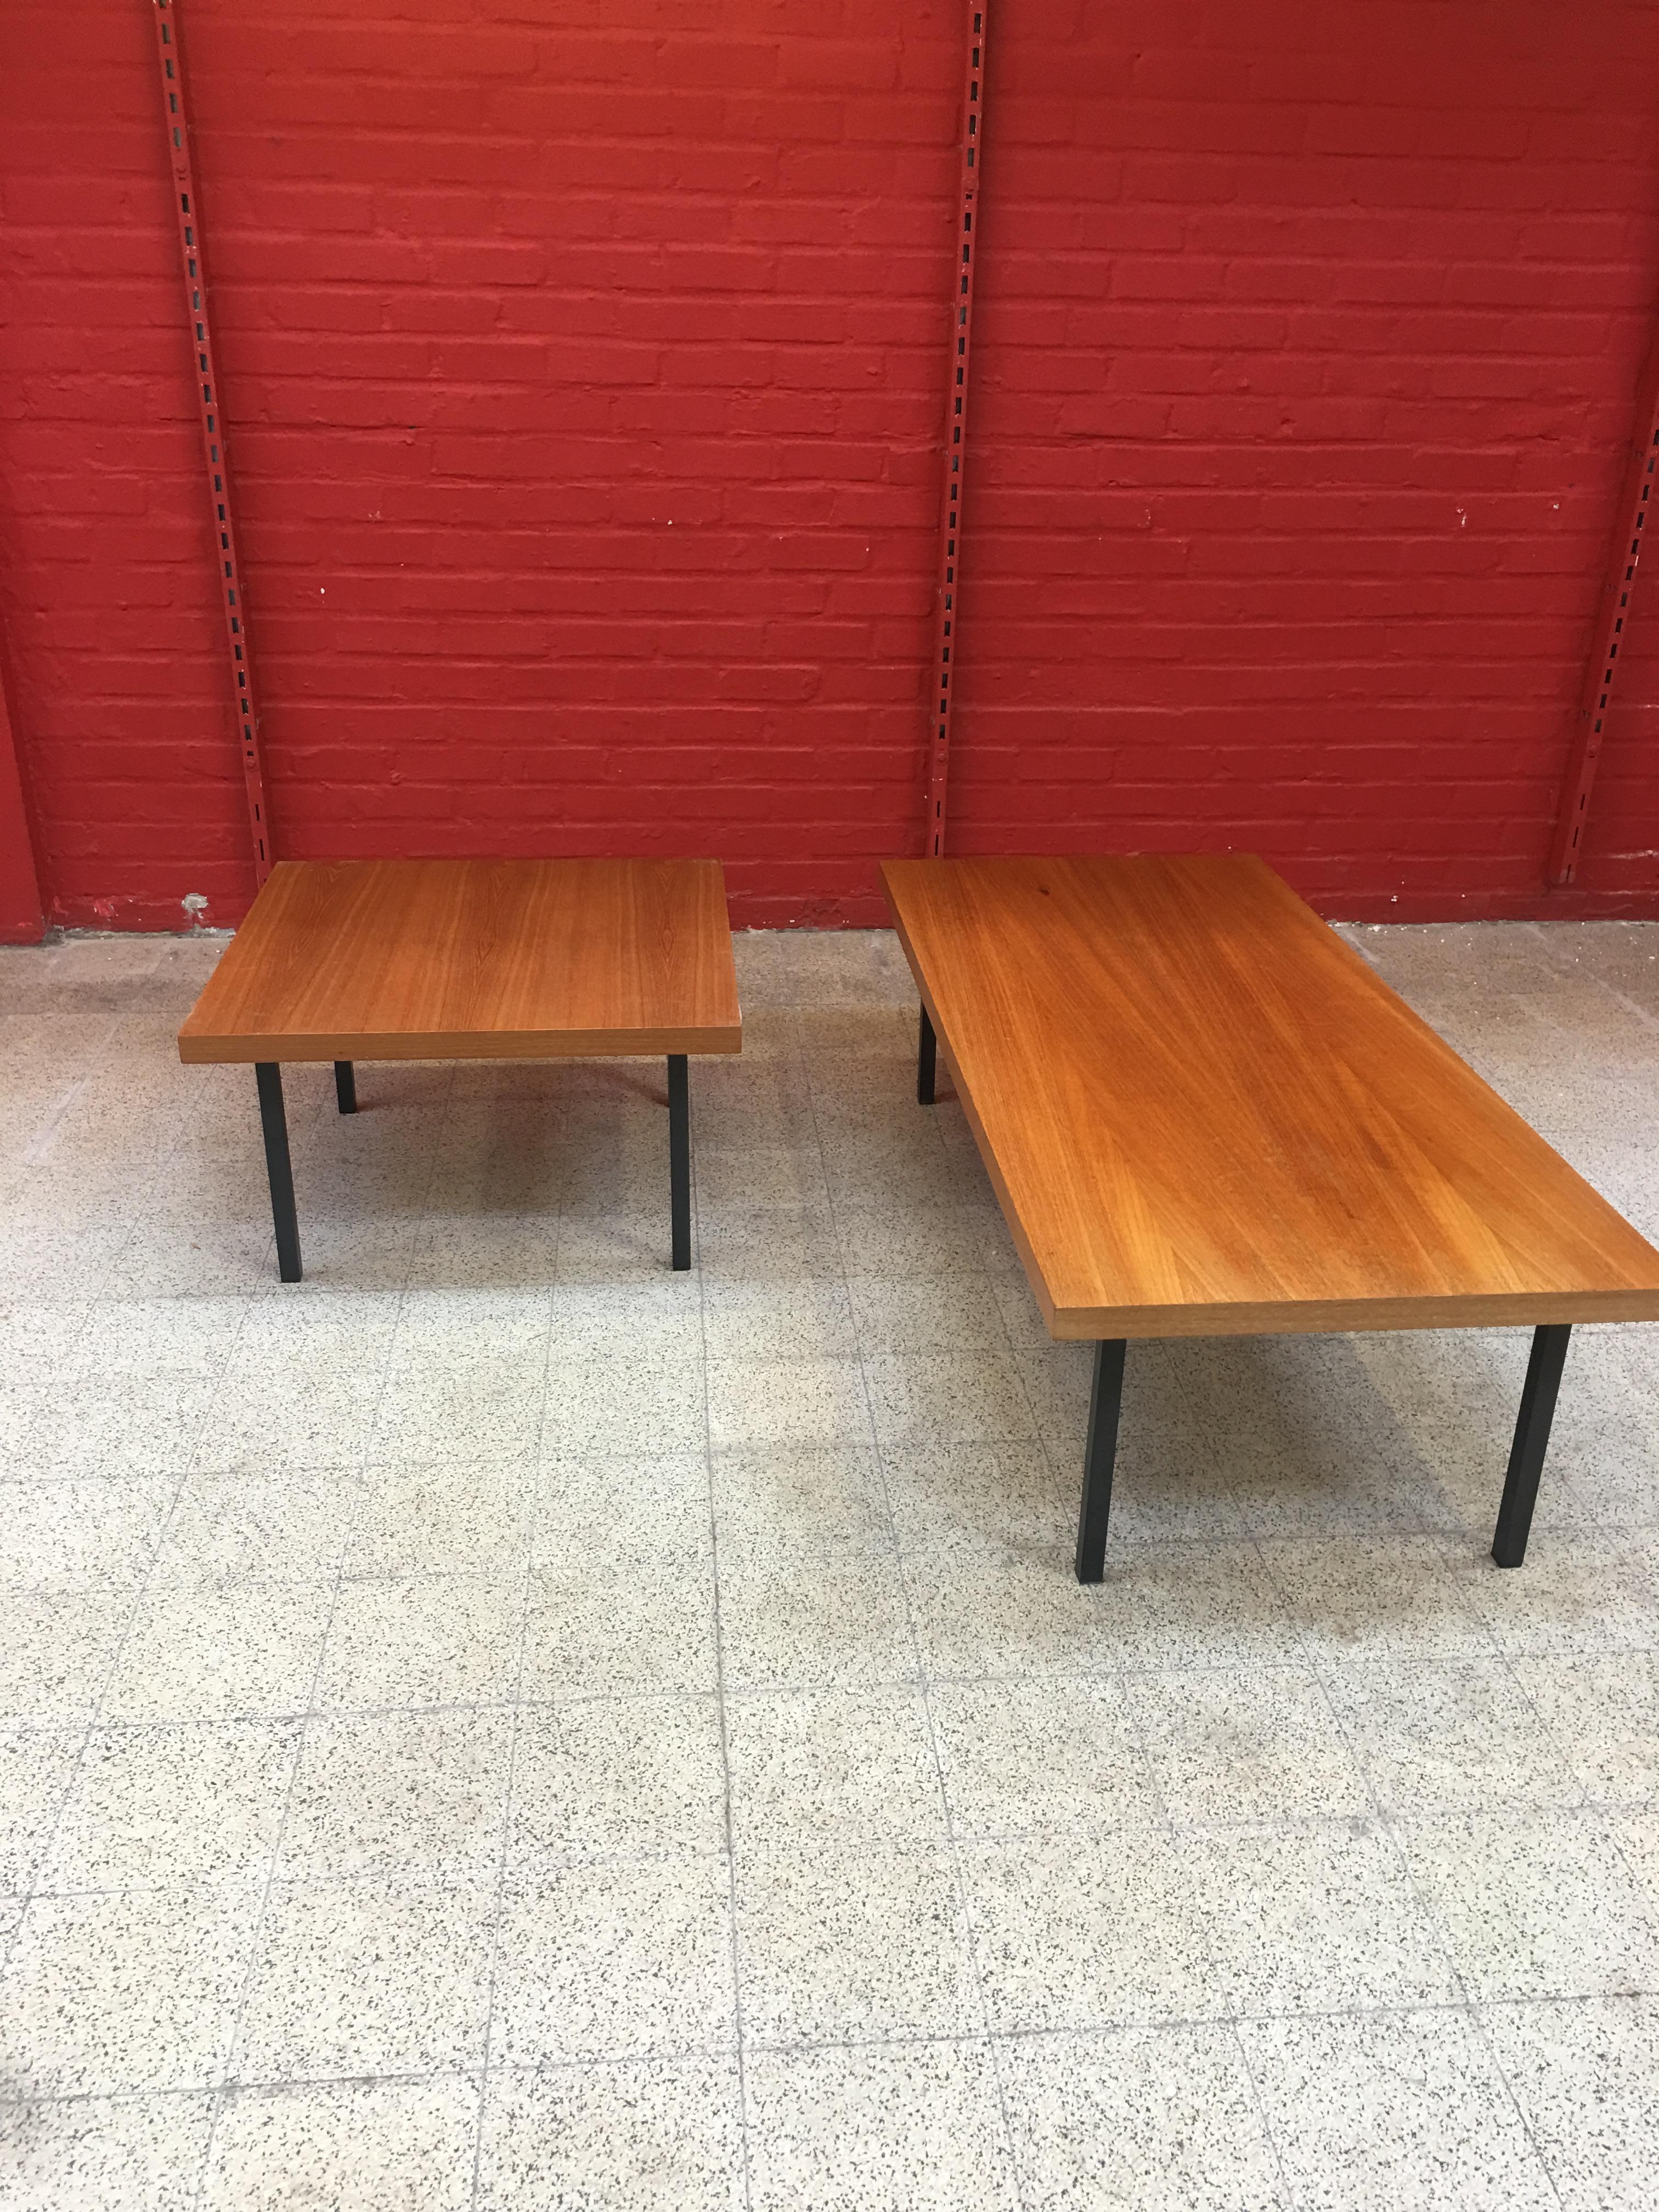 2 coffee tables in Knoll style, circa 1960
lacquered metal legs, mahogany veneer top
Dimension: 40 x 70 x 70 cm
and 40 x 140 x 64 cm.